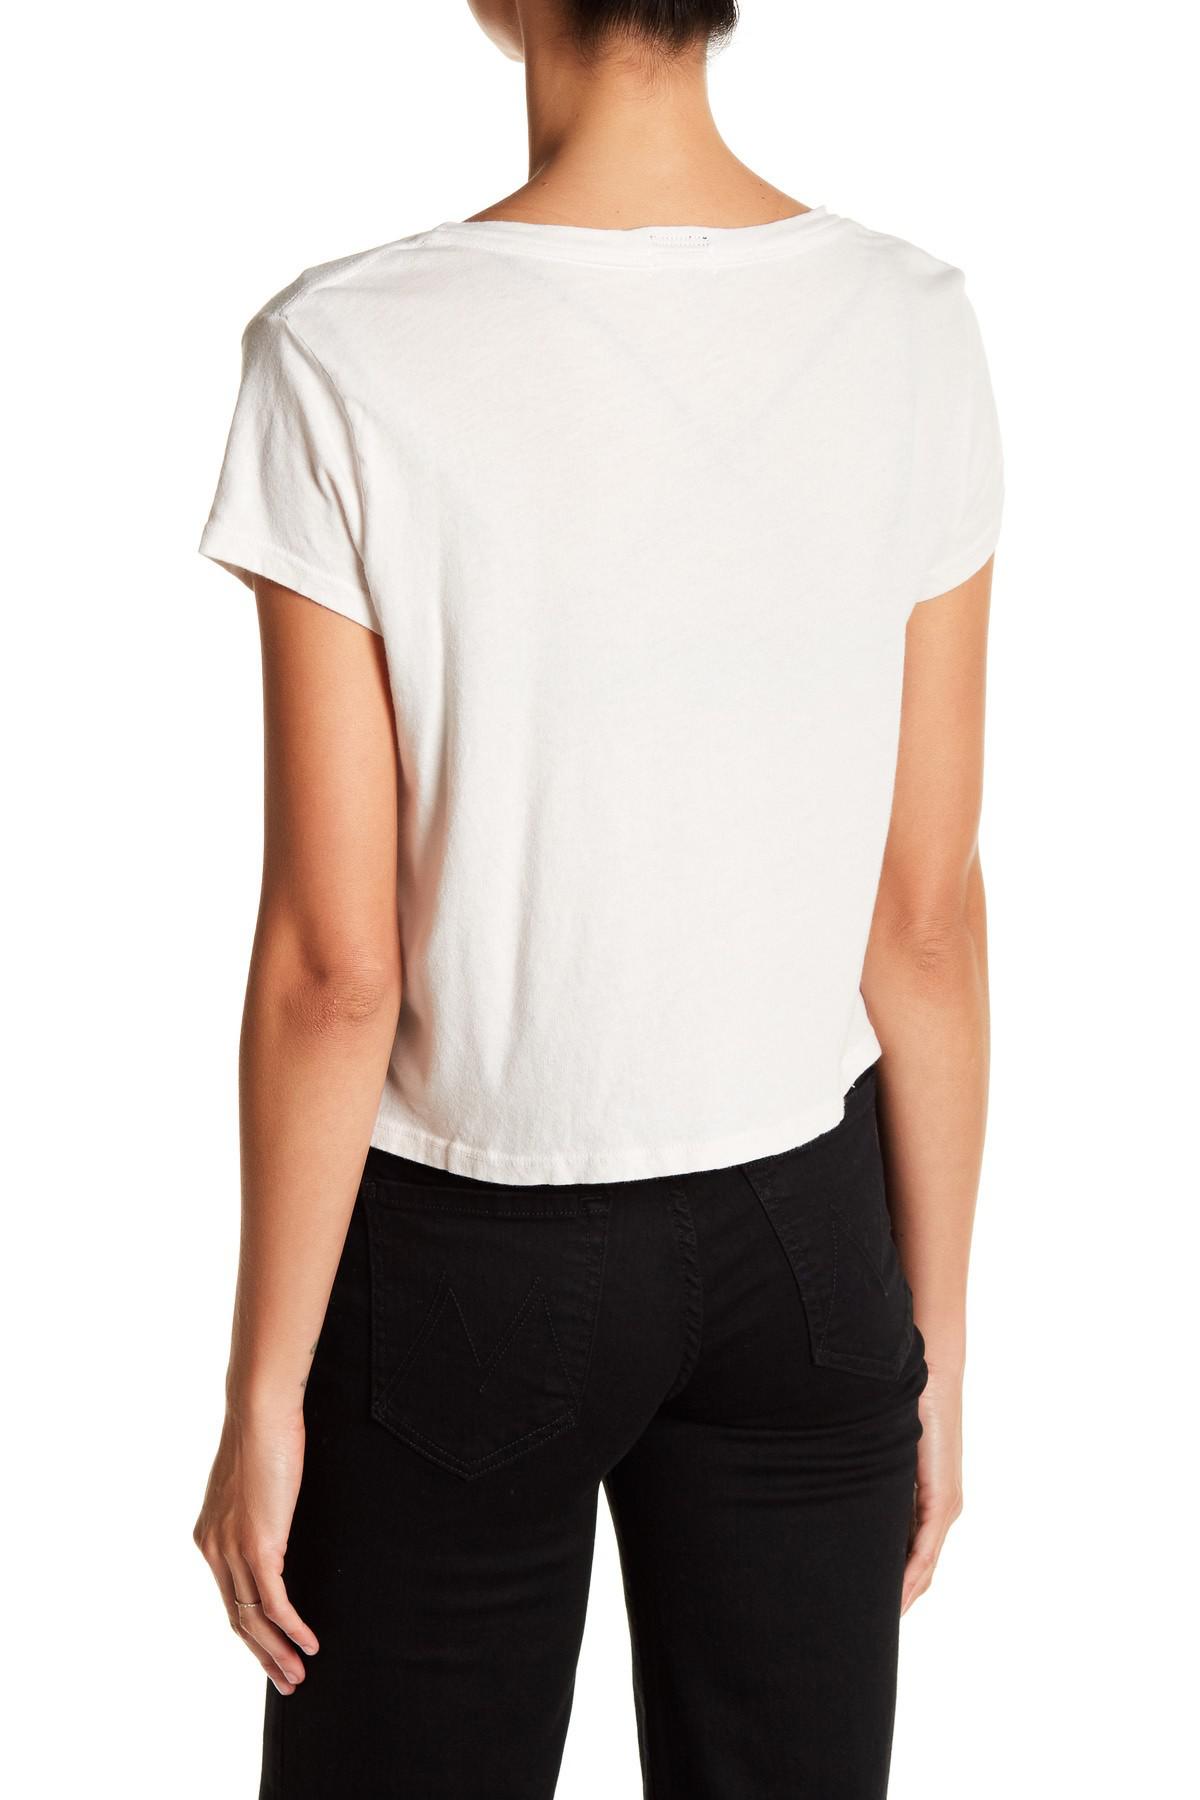 Lyst - Mother The Cropped Goodie Goodie Graphic Tee in White